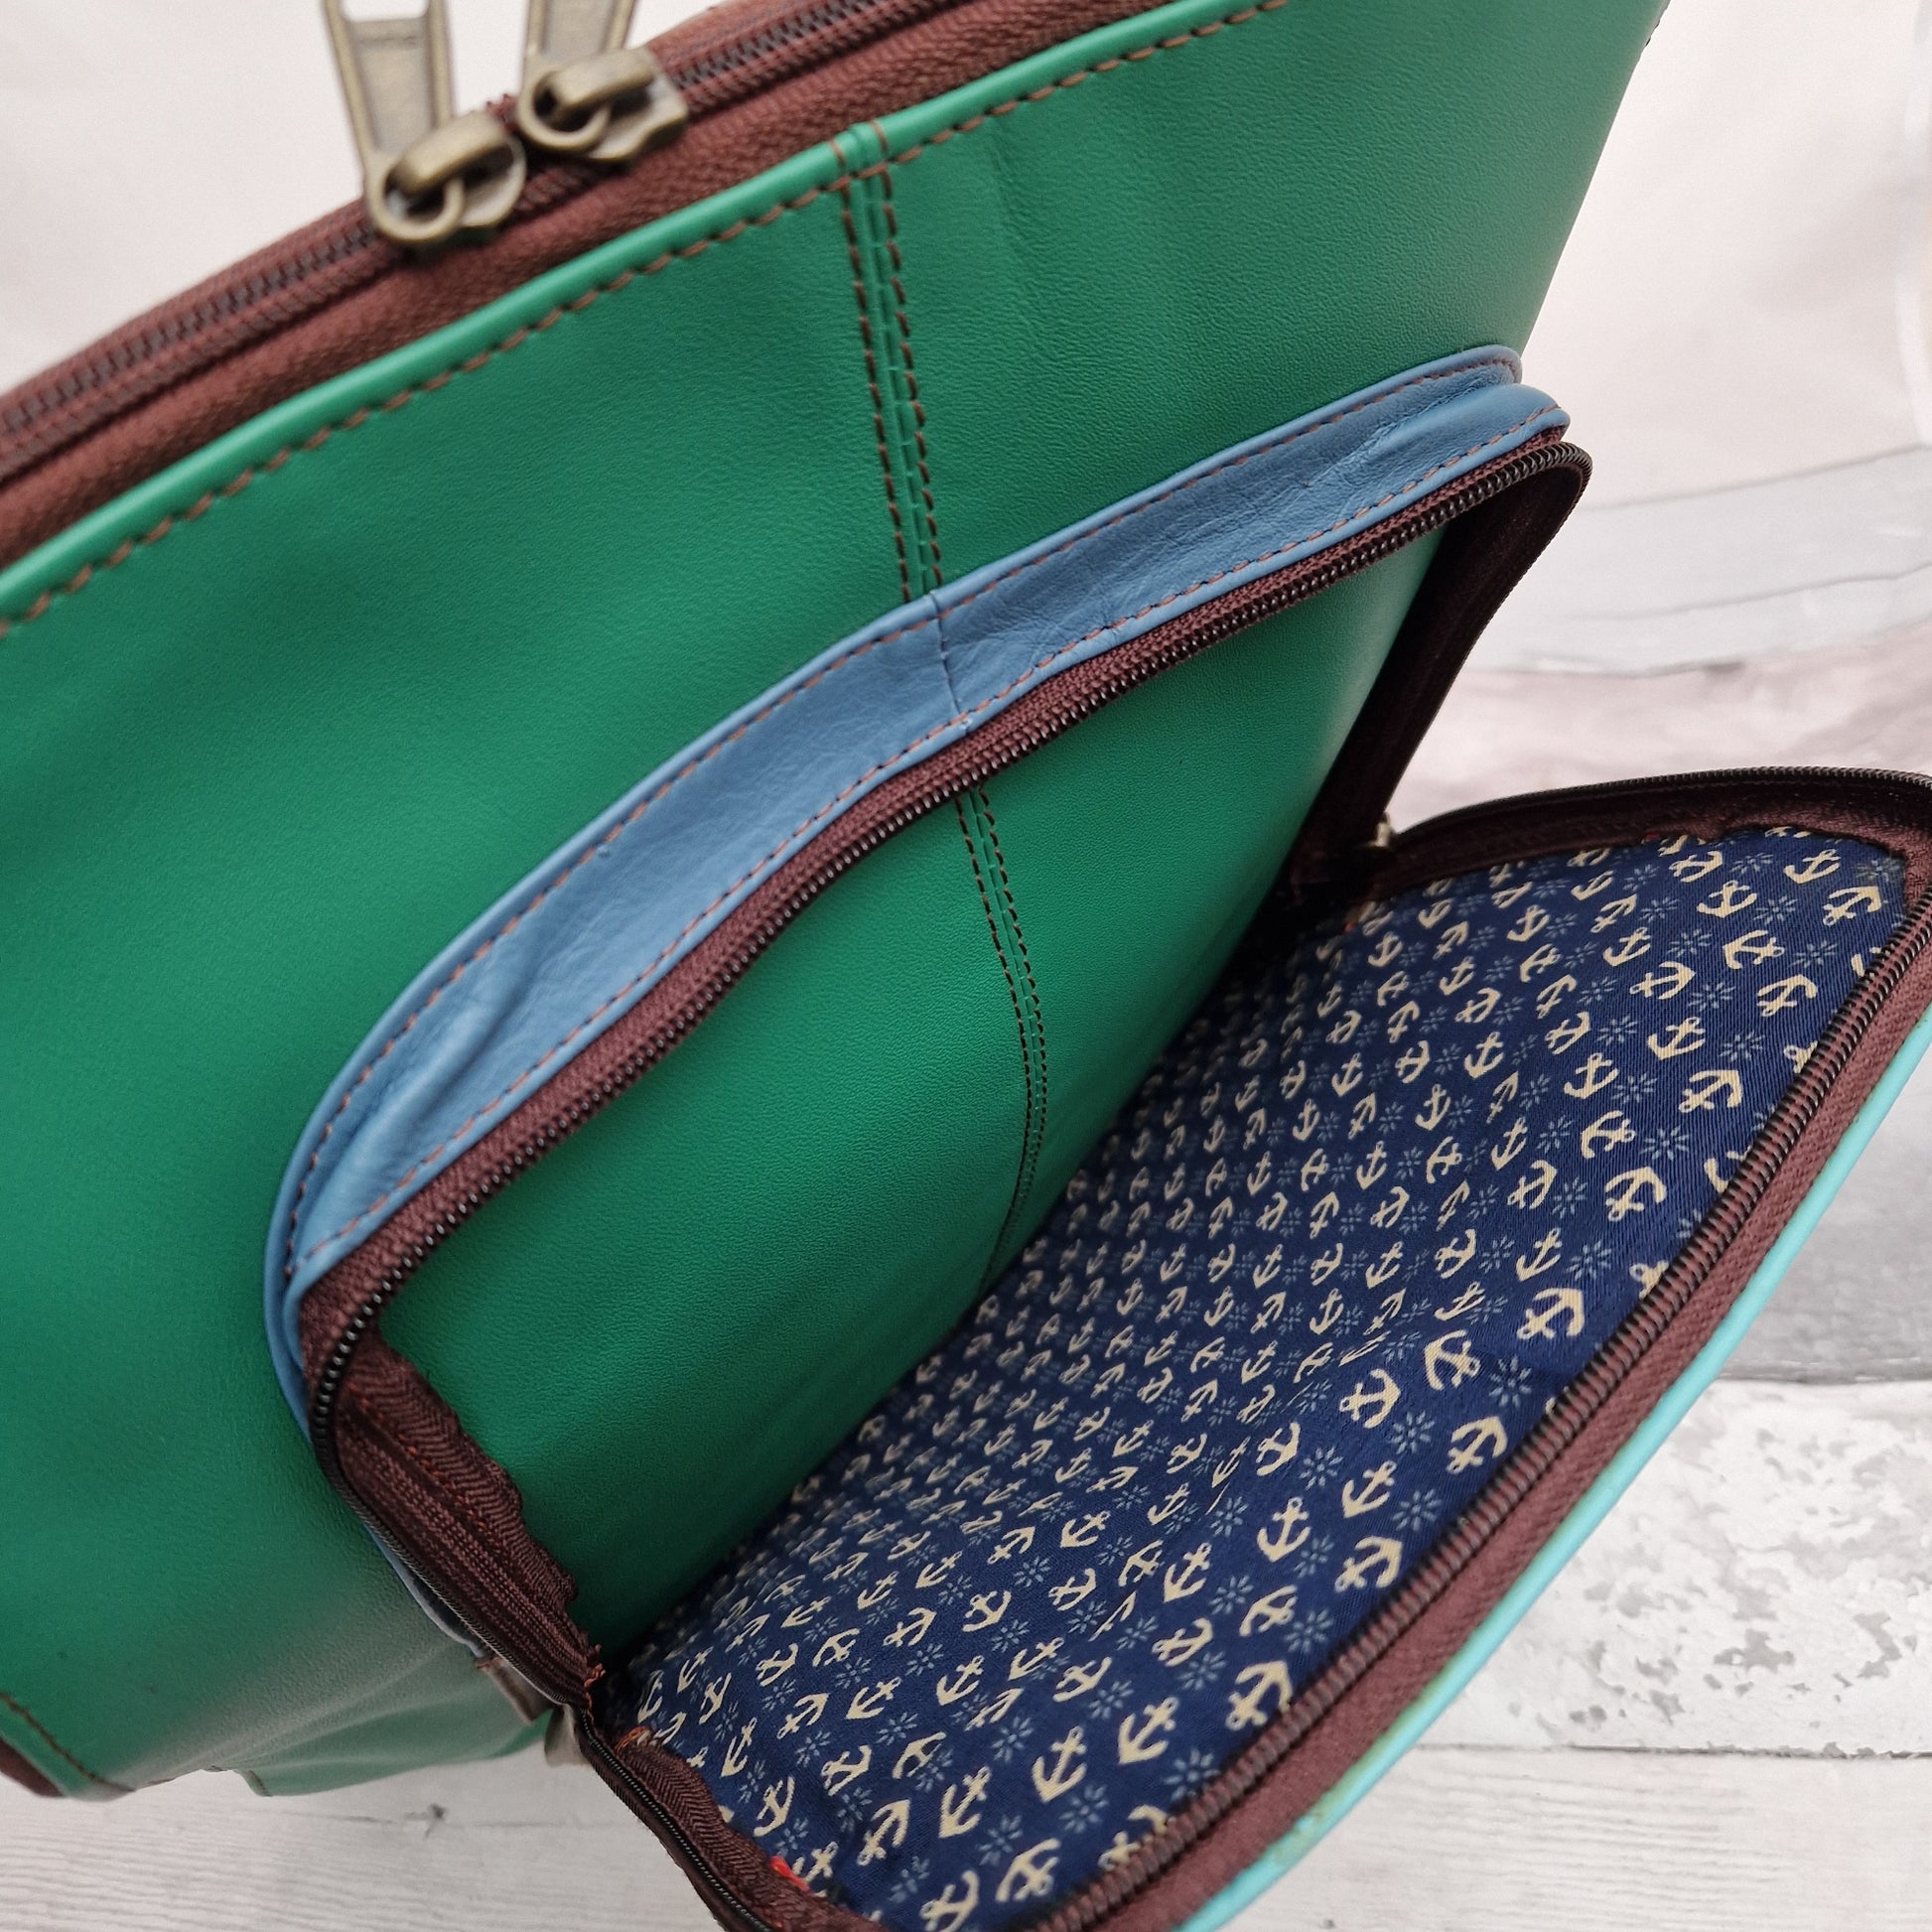 Emerald Green Leather Ruch Sack with a front panel in Giraffe Print.